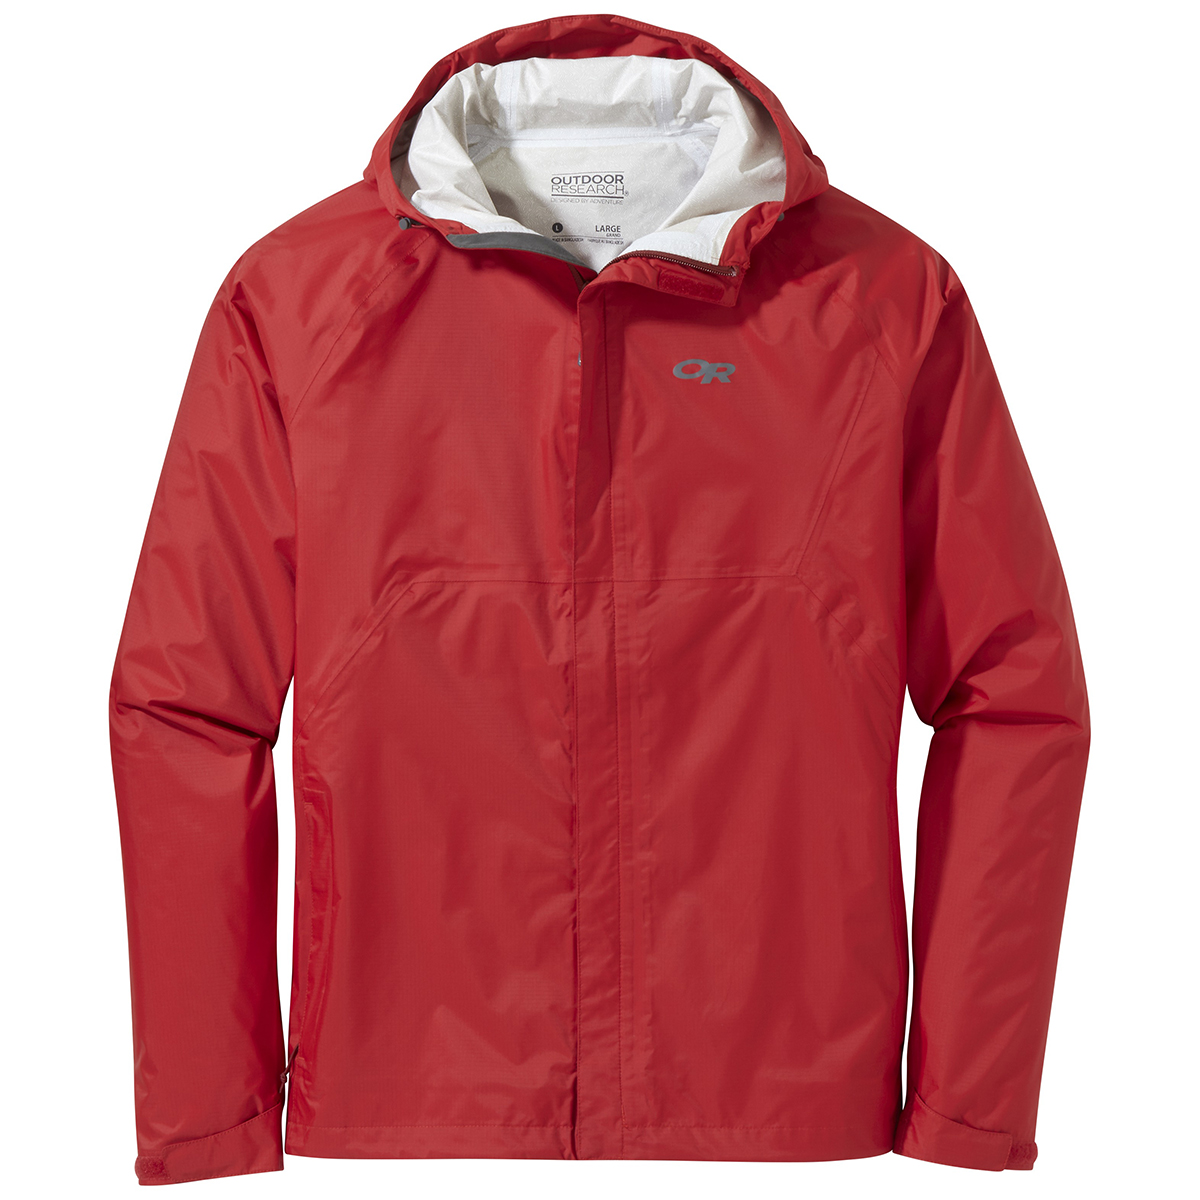 Outdoor Research Men's Apollo Jacket - Red, M